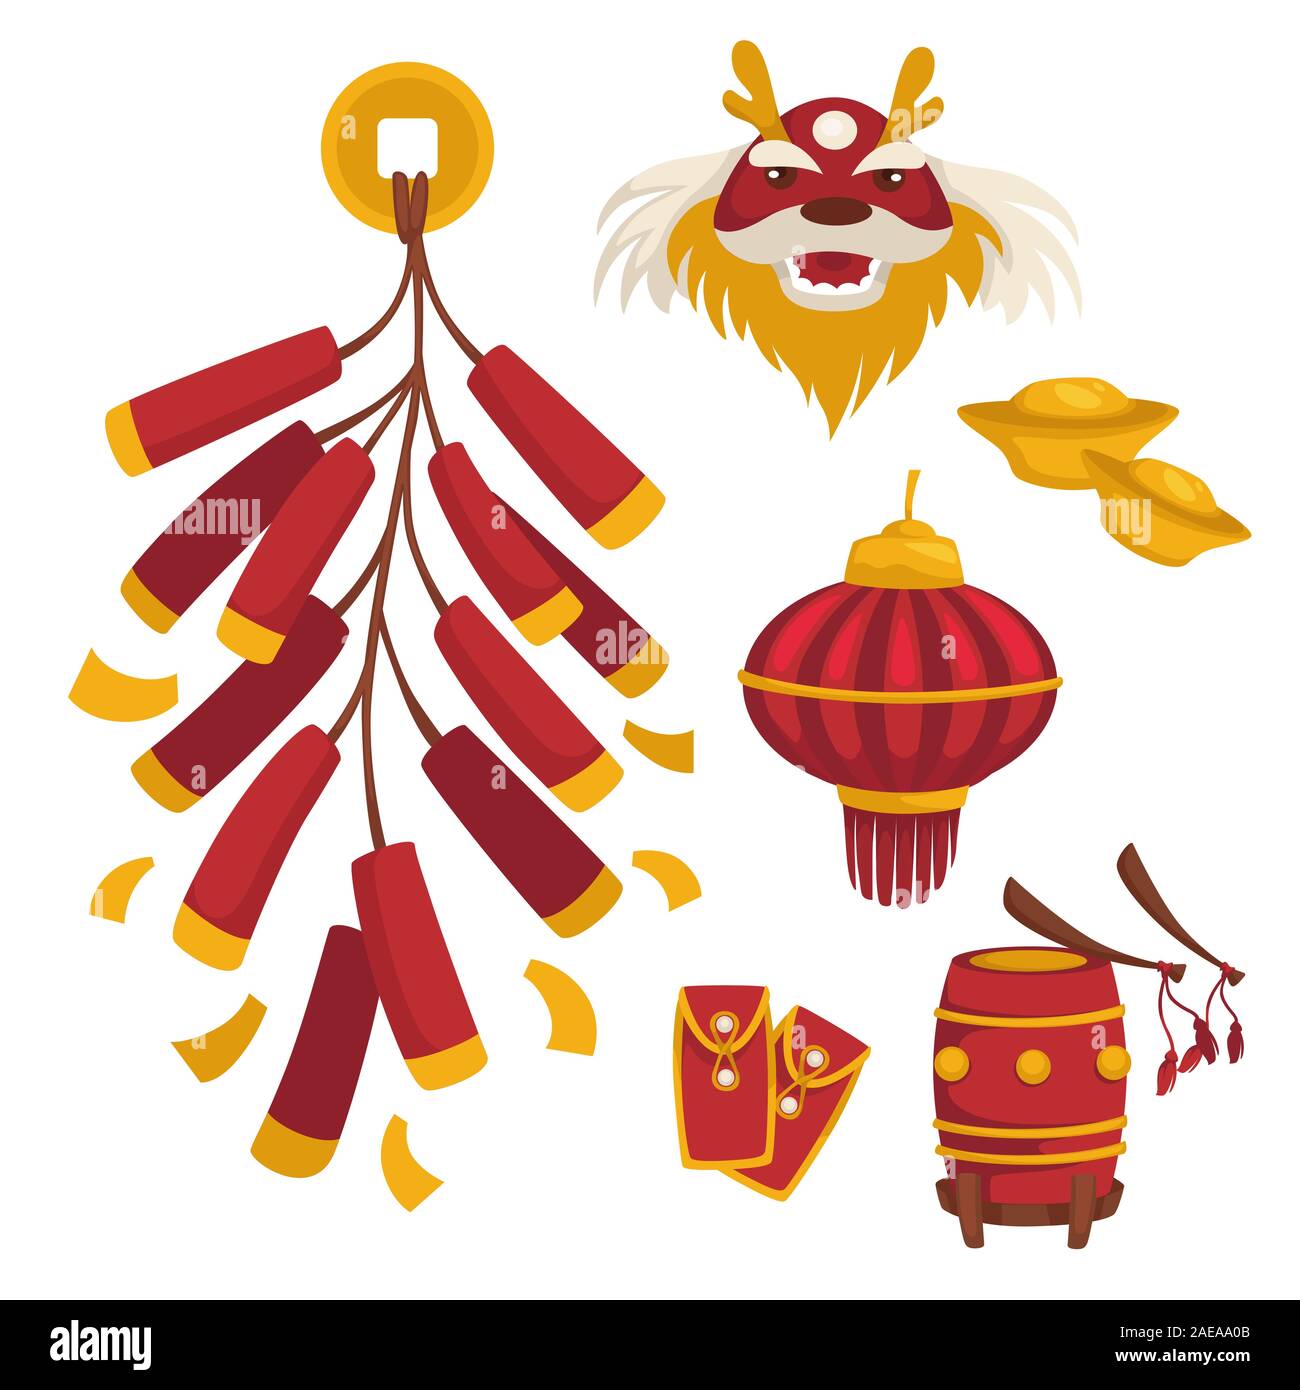 Chinese New Year celebration traditional symbols in red and yellow Stock Vector